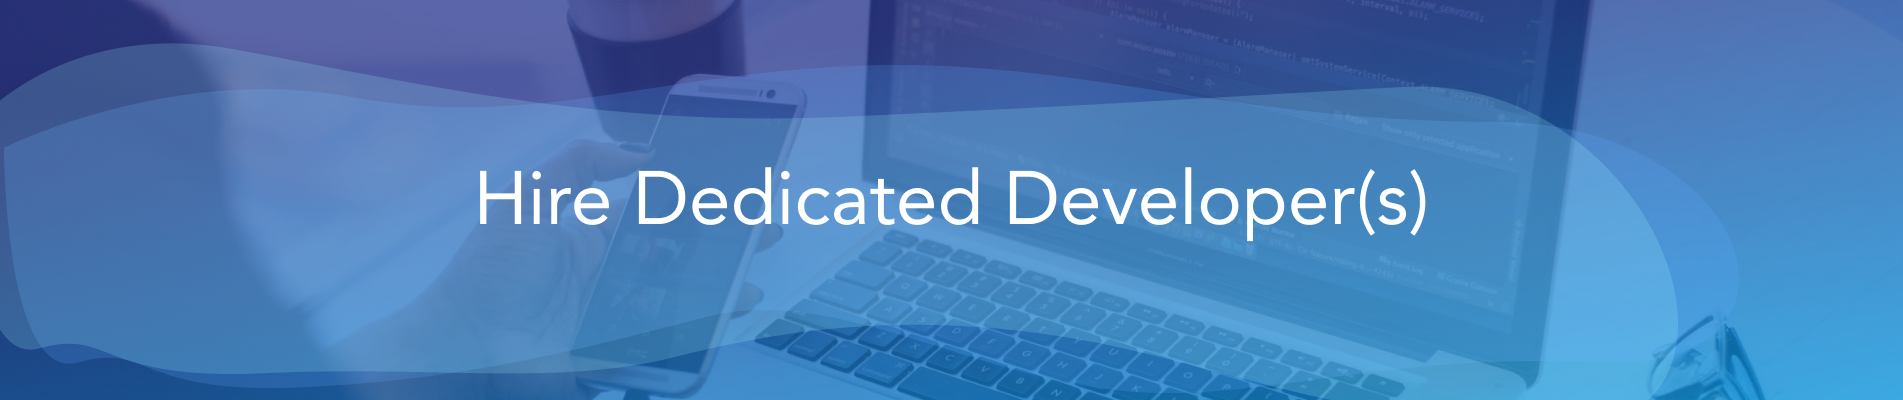 Hire Dedicated Developers London | Hire Developers London